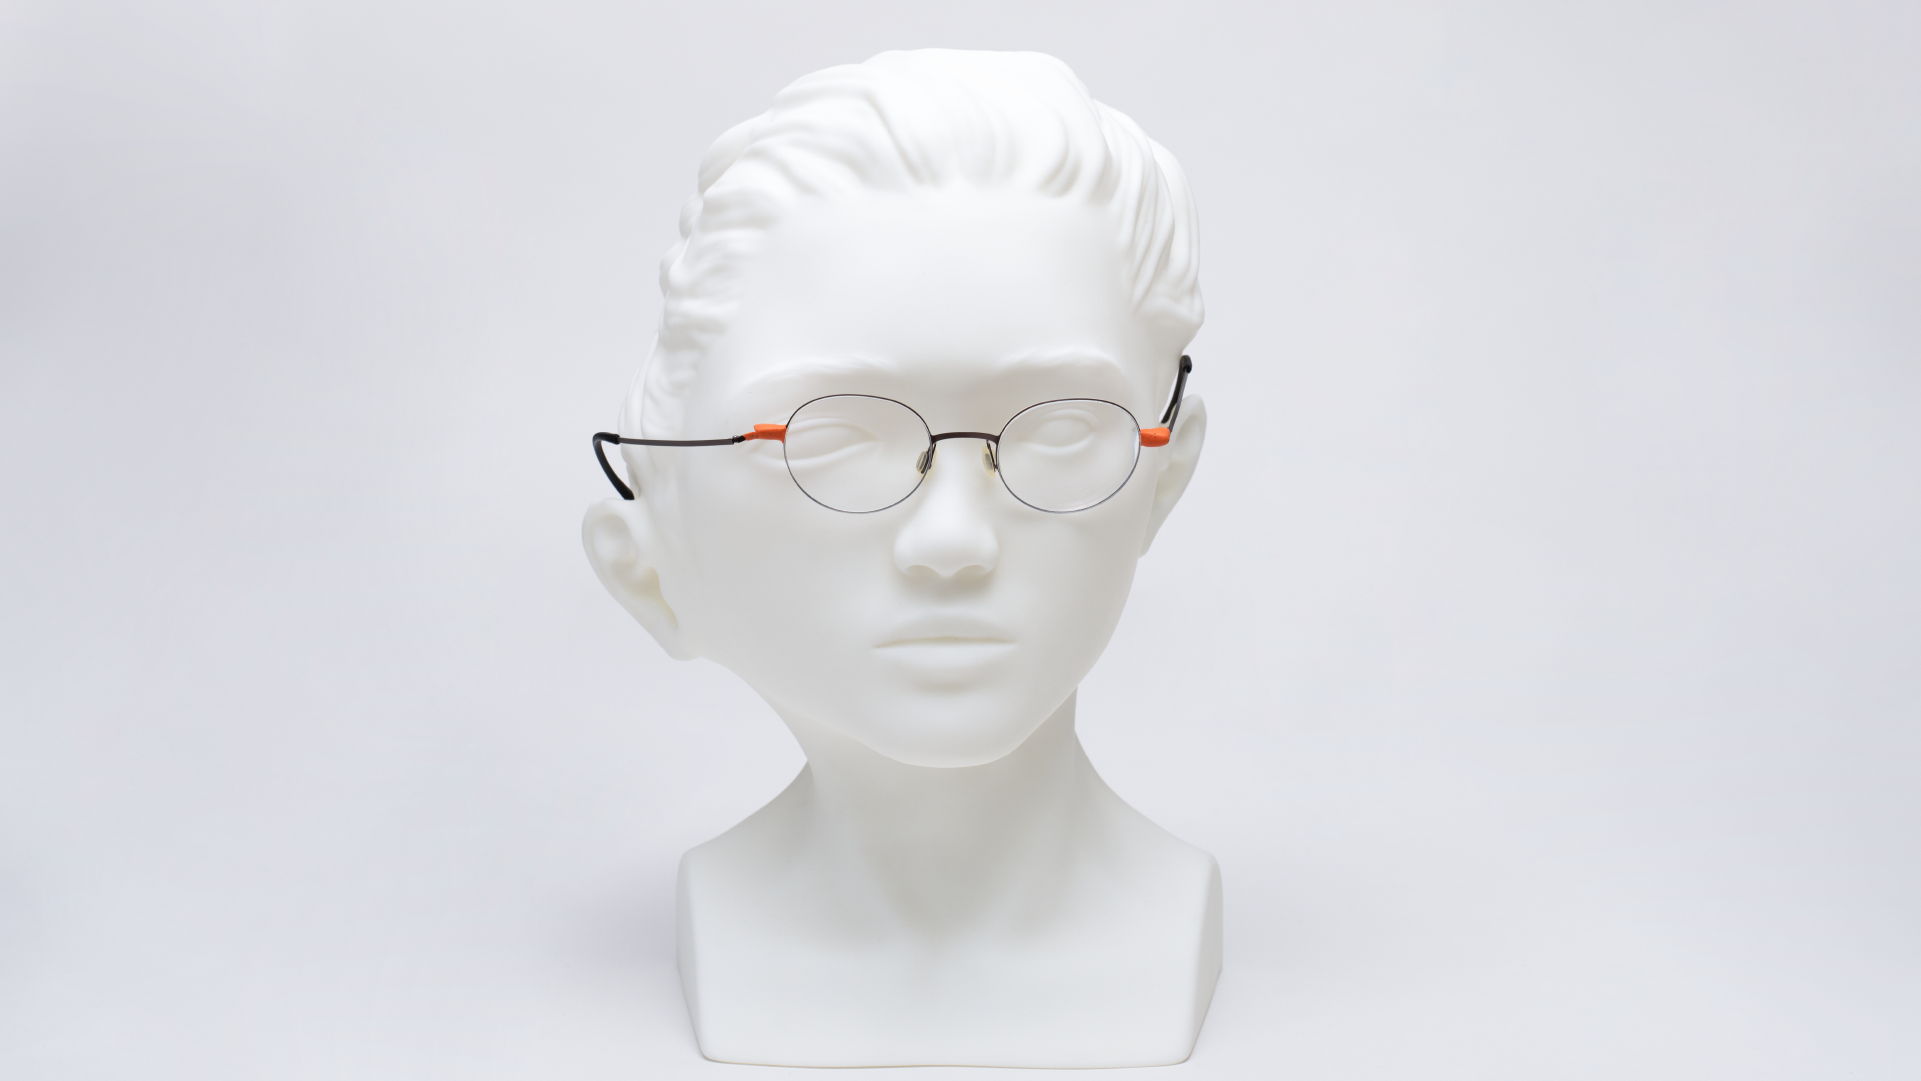 Minjeong’s Glasses - repaired, part of R for Repair 2021. Imagery by KHOOGJ